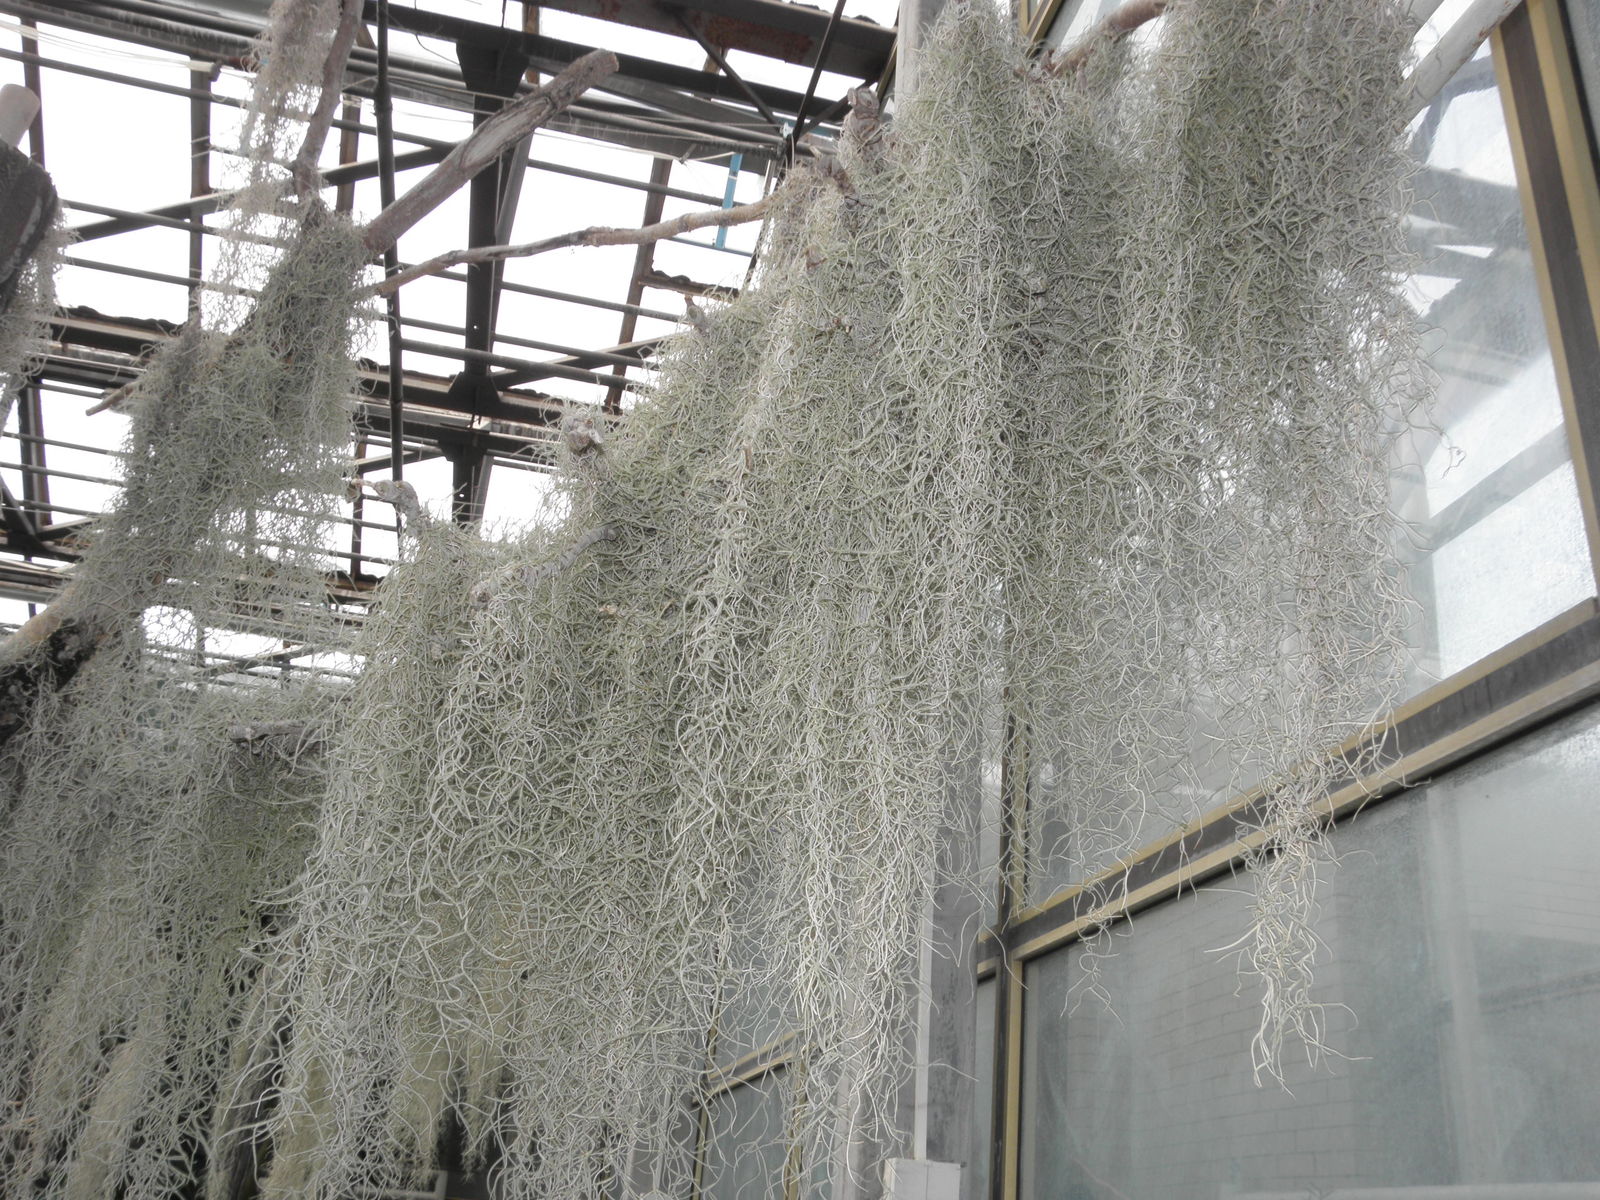 Spanish Moss - Institute of Food and Agricultural Sciences